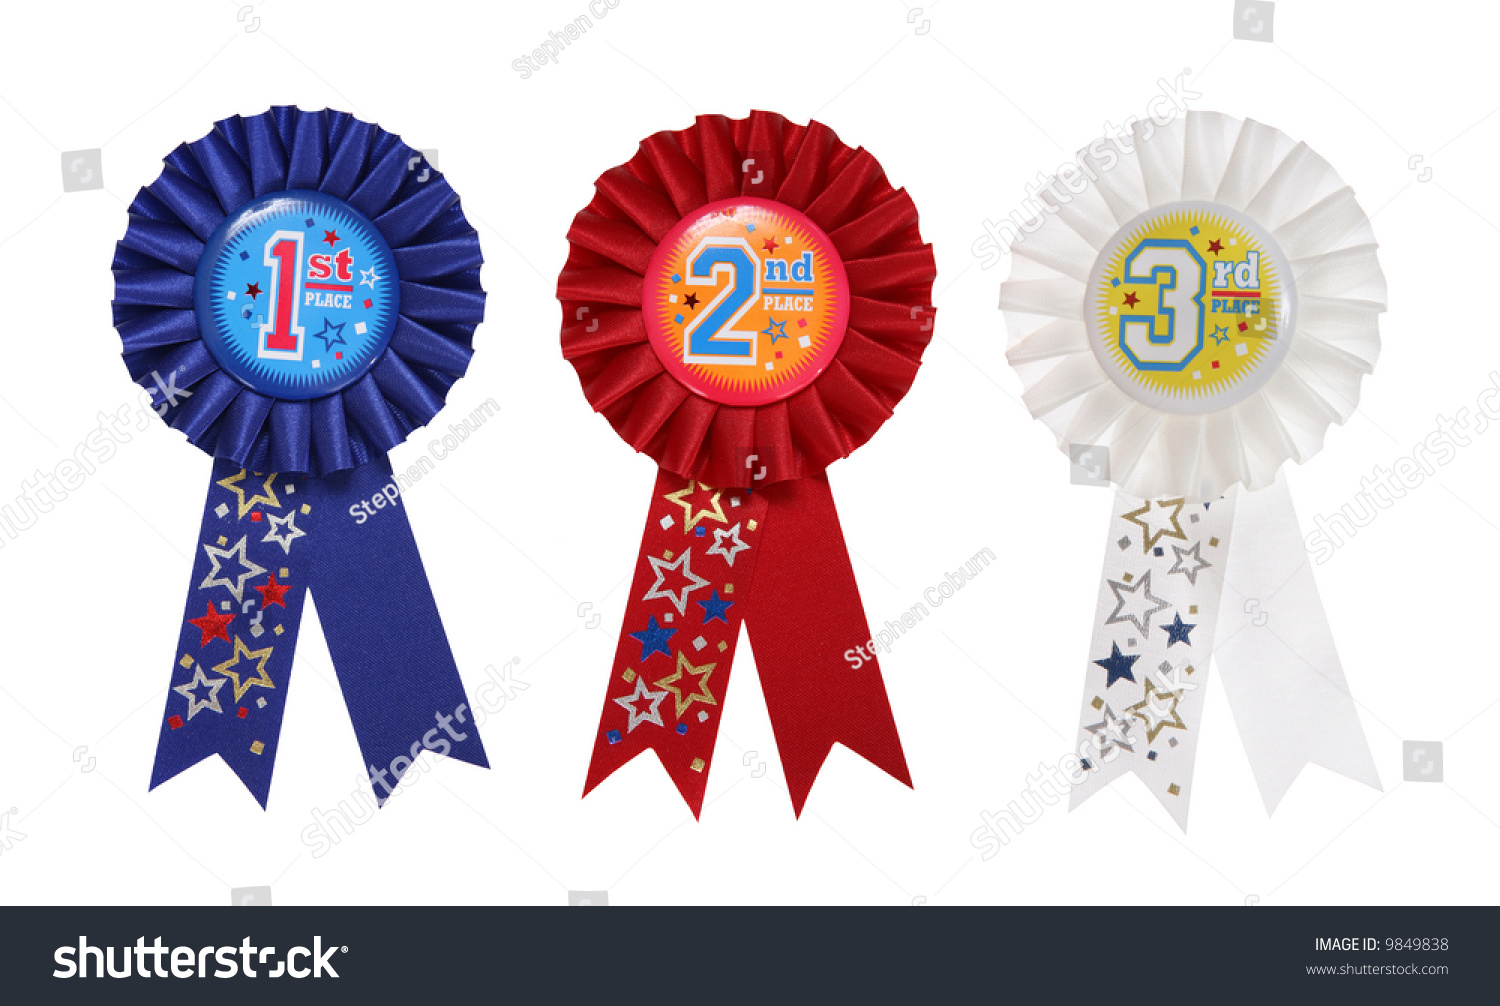 first-second-third-place-award-ribbons-stock-photo-9849838-shutterstock